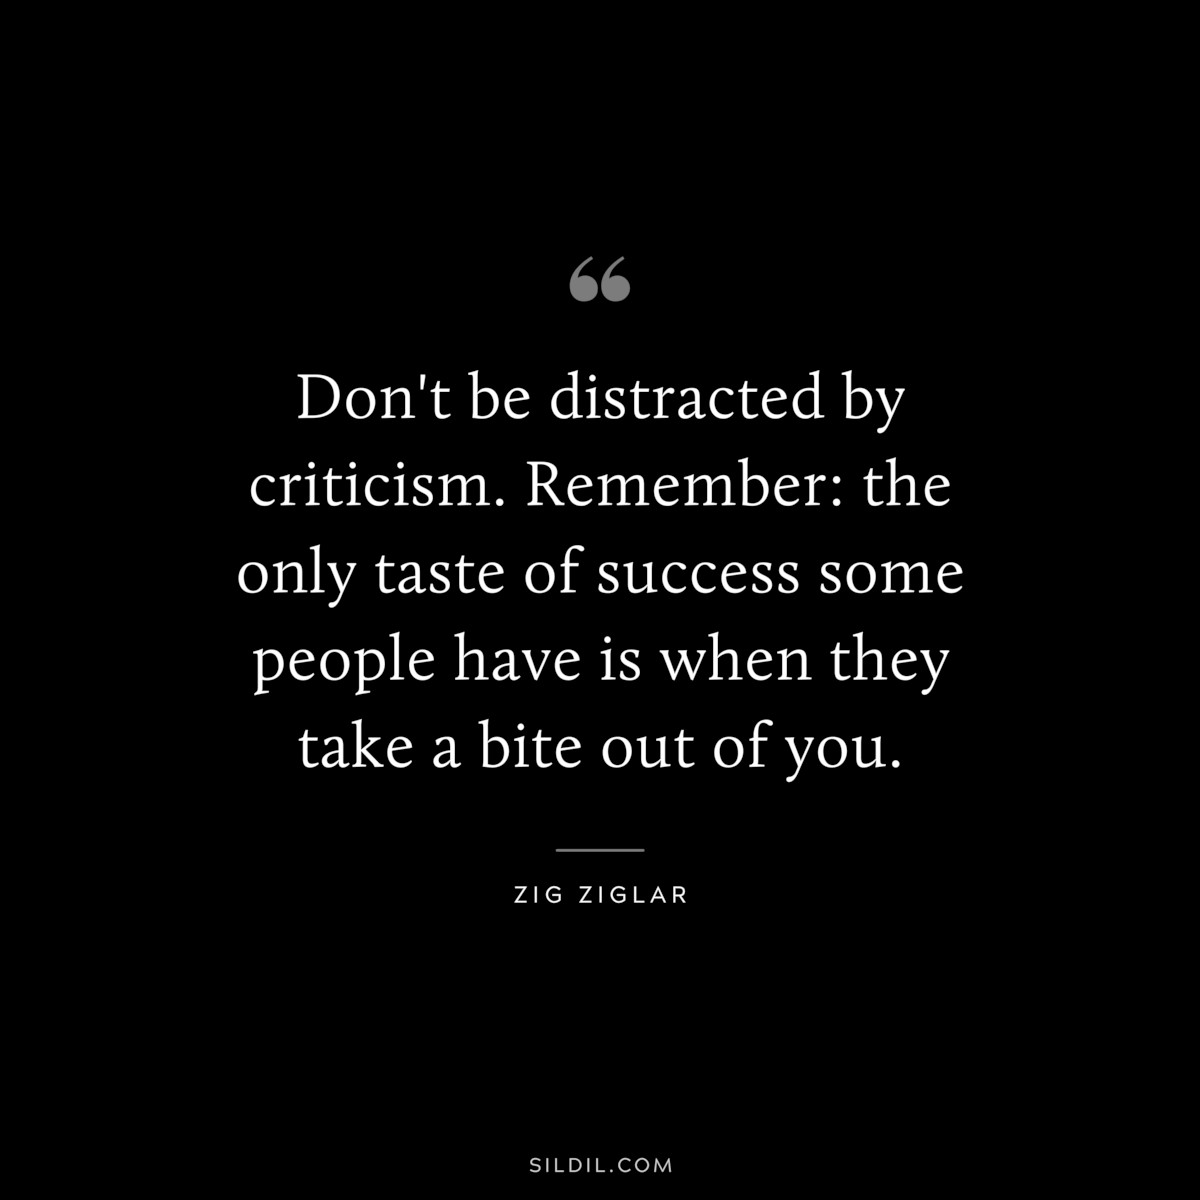 Don't be distracted by criticism. Remember: the only taste of success some people have is when they take a bite out of you. ― Zig Ziglar